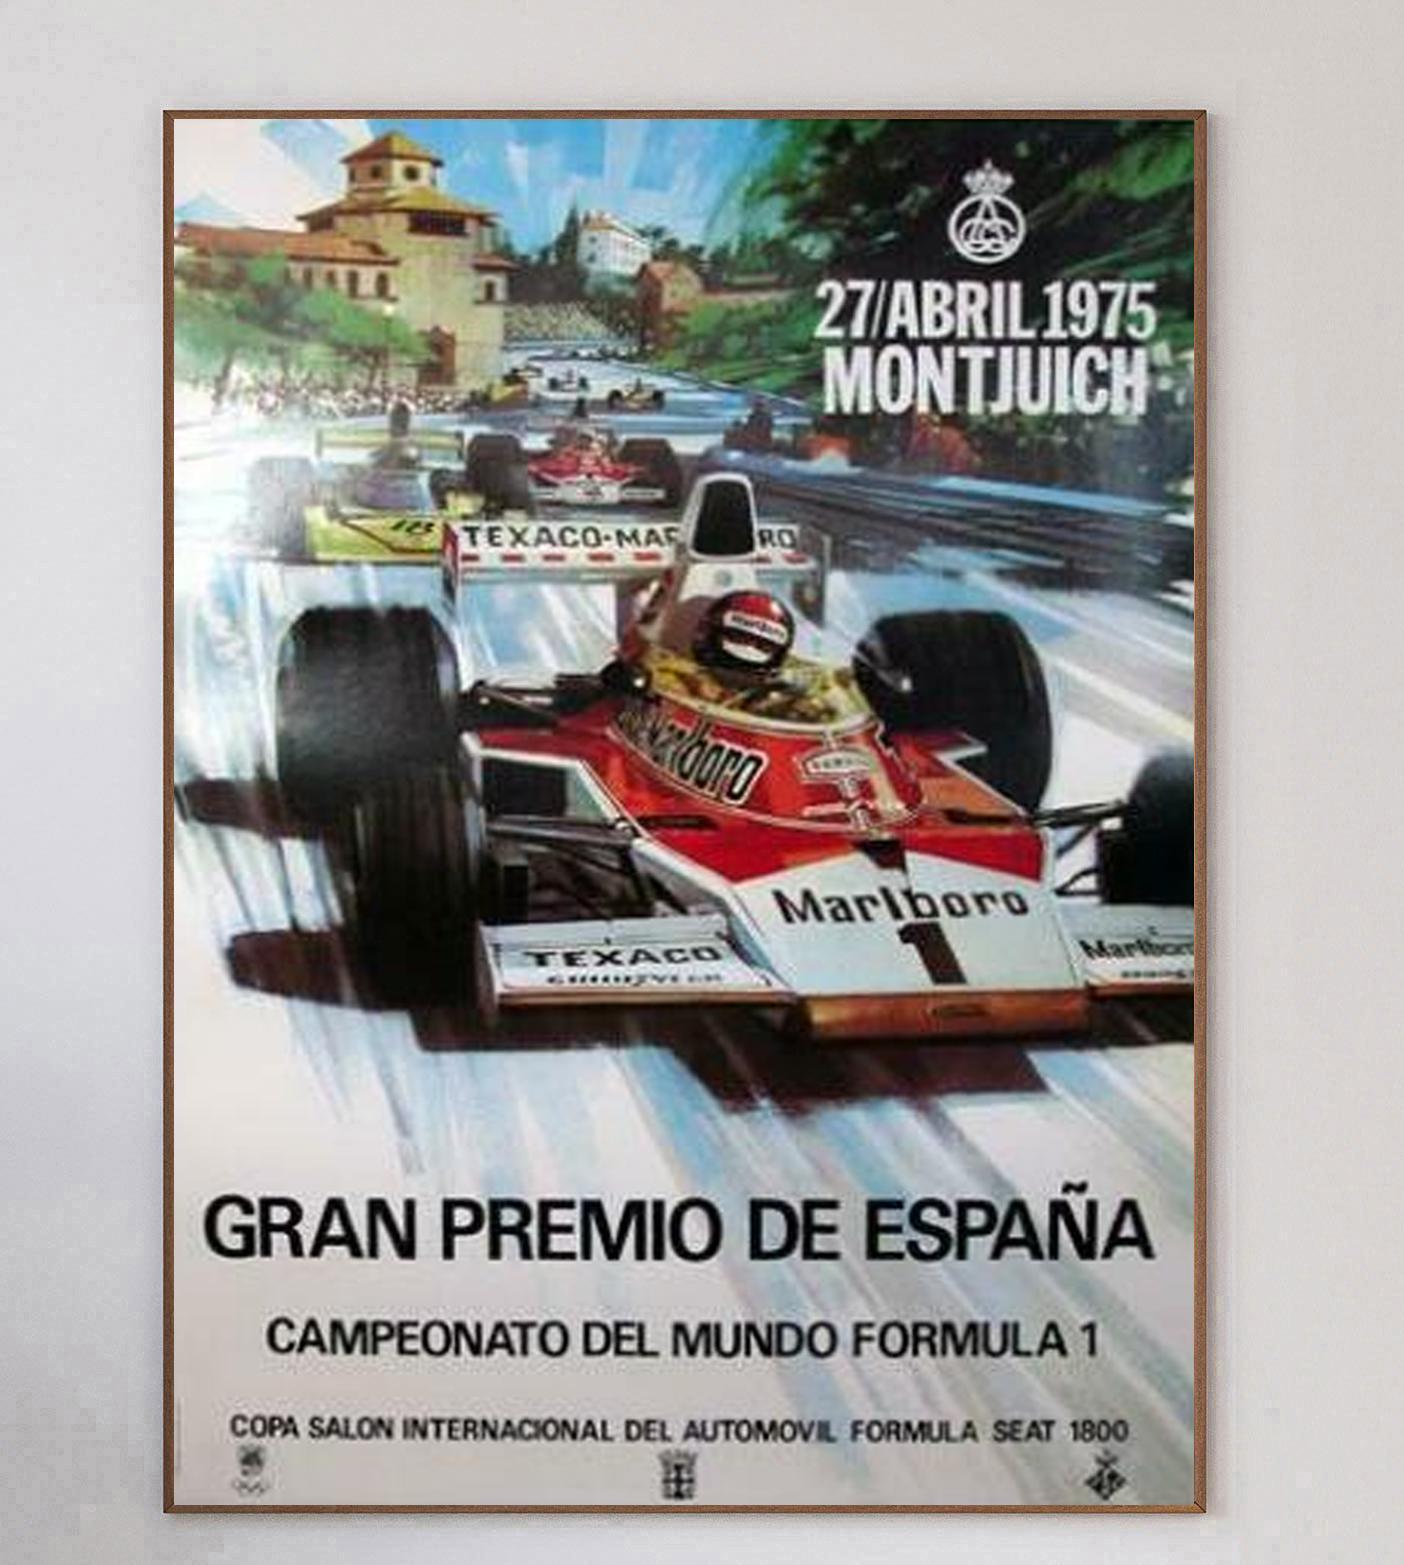 This poster is for the 1975  Grand Premio De Espana or Spanish Grand Prix, with the brilliant illustration design by artist Michael Turner for the event held at Montjuich in Barcelona. A number of events made the race one of the most controversial